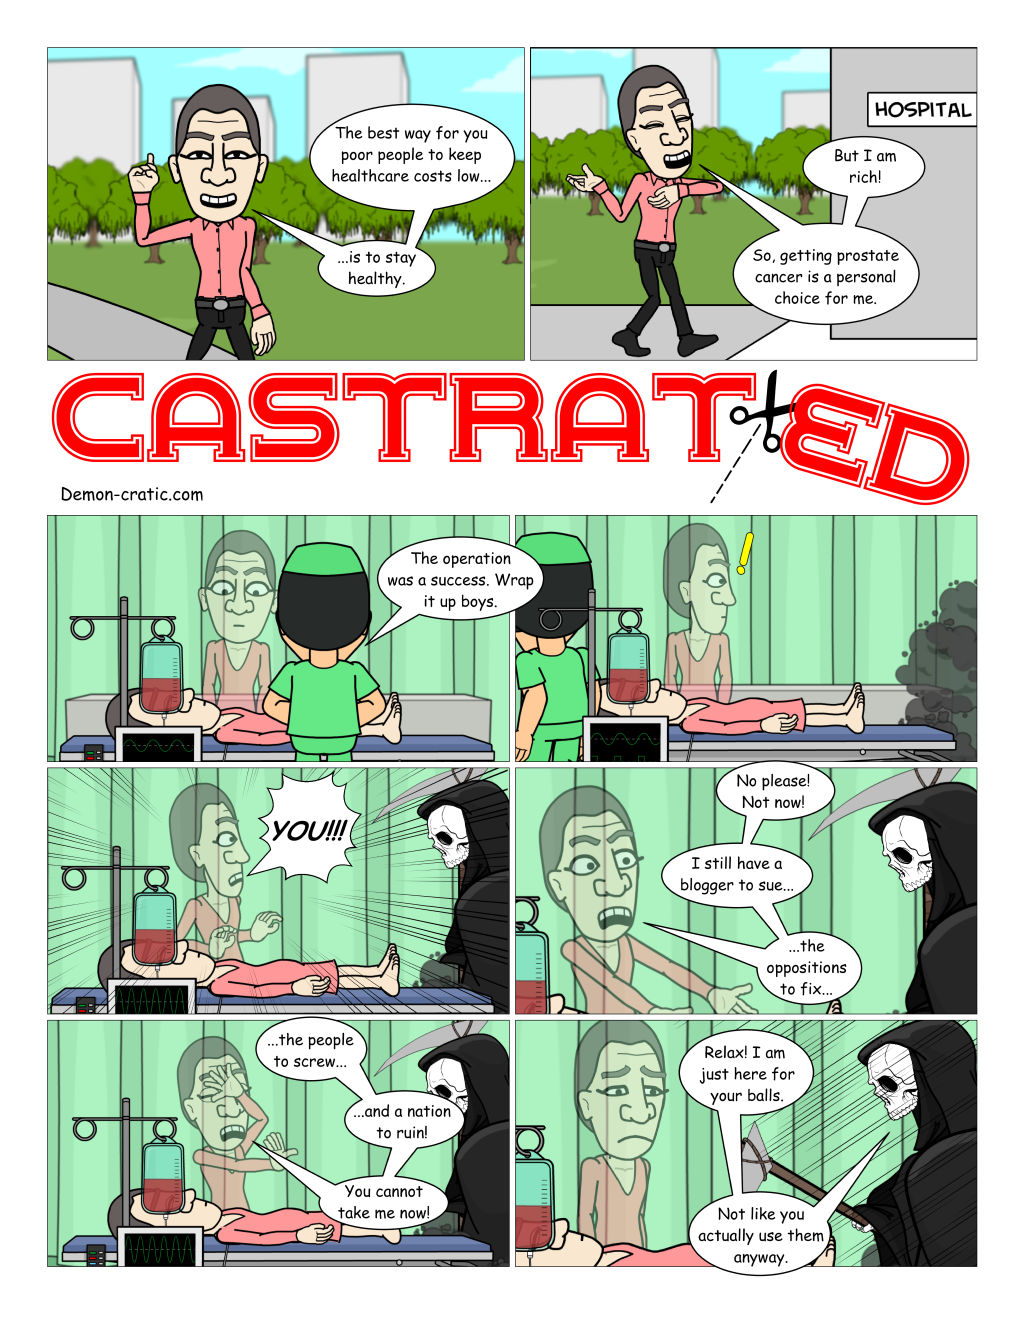 Accidental castration hilarious fan compilations